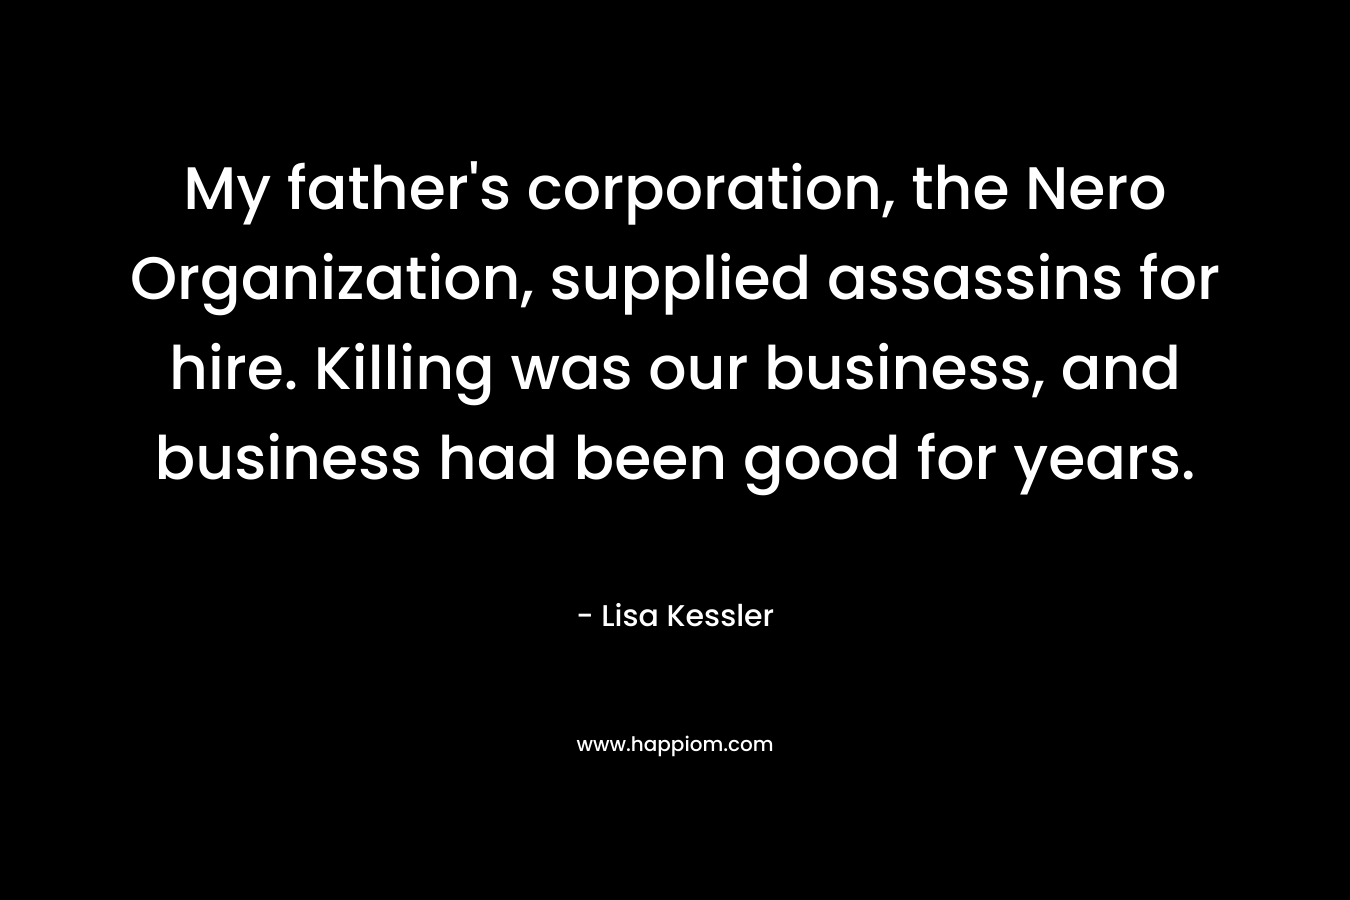 My father's corporation, the Nero Organization, supplied assassins for hire. Killing was our business, and business had been good for years.